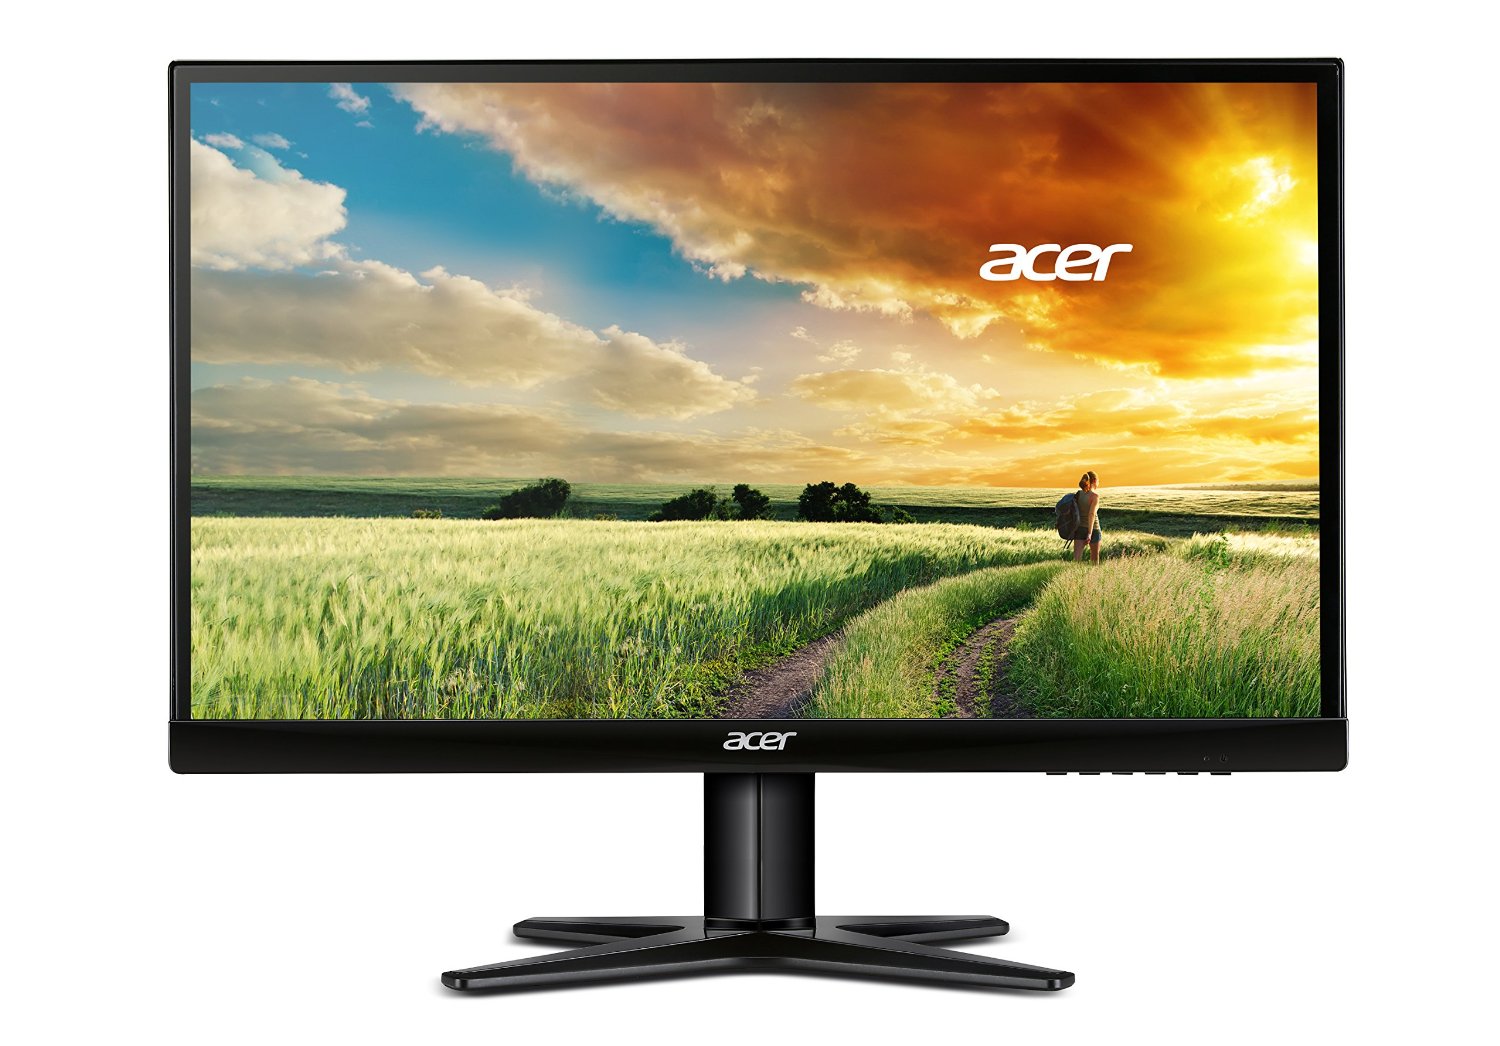 Acer G257HL bmidx 25-Inch Full HD Widescreen Display